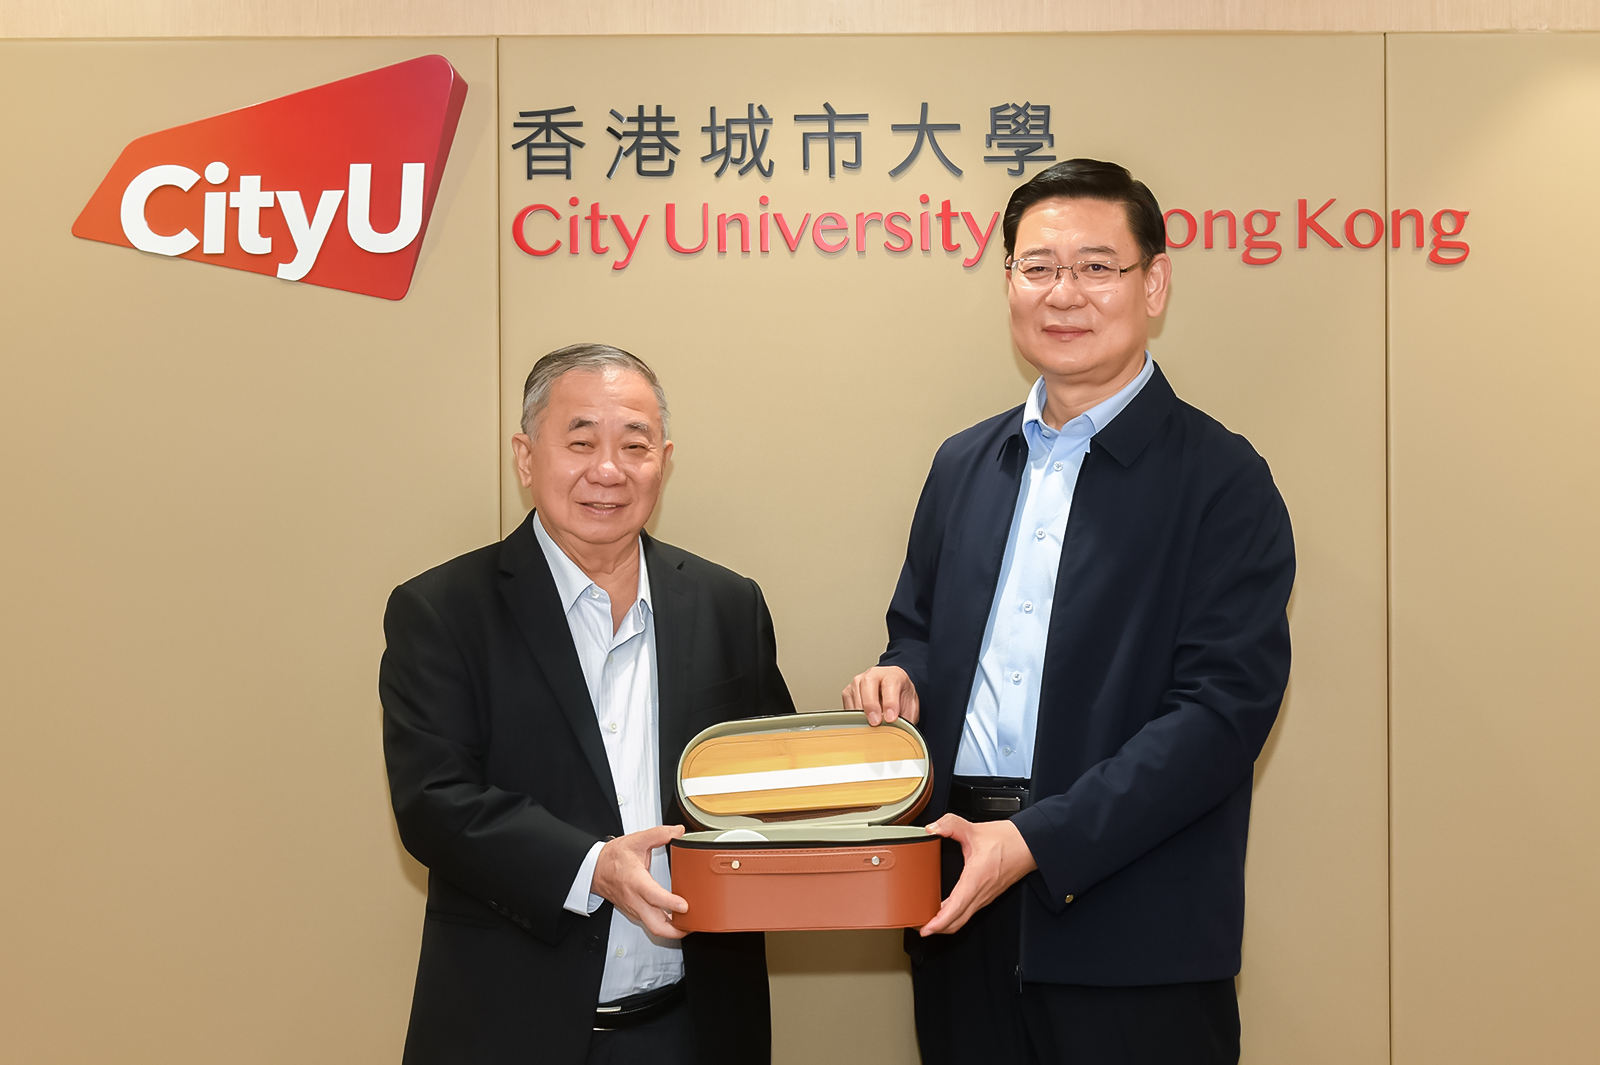 President Boey (left) and Mr Wang exchange souvenirs.